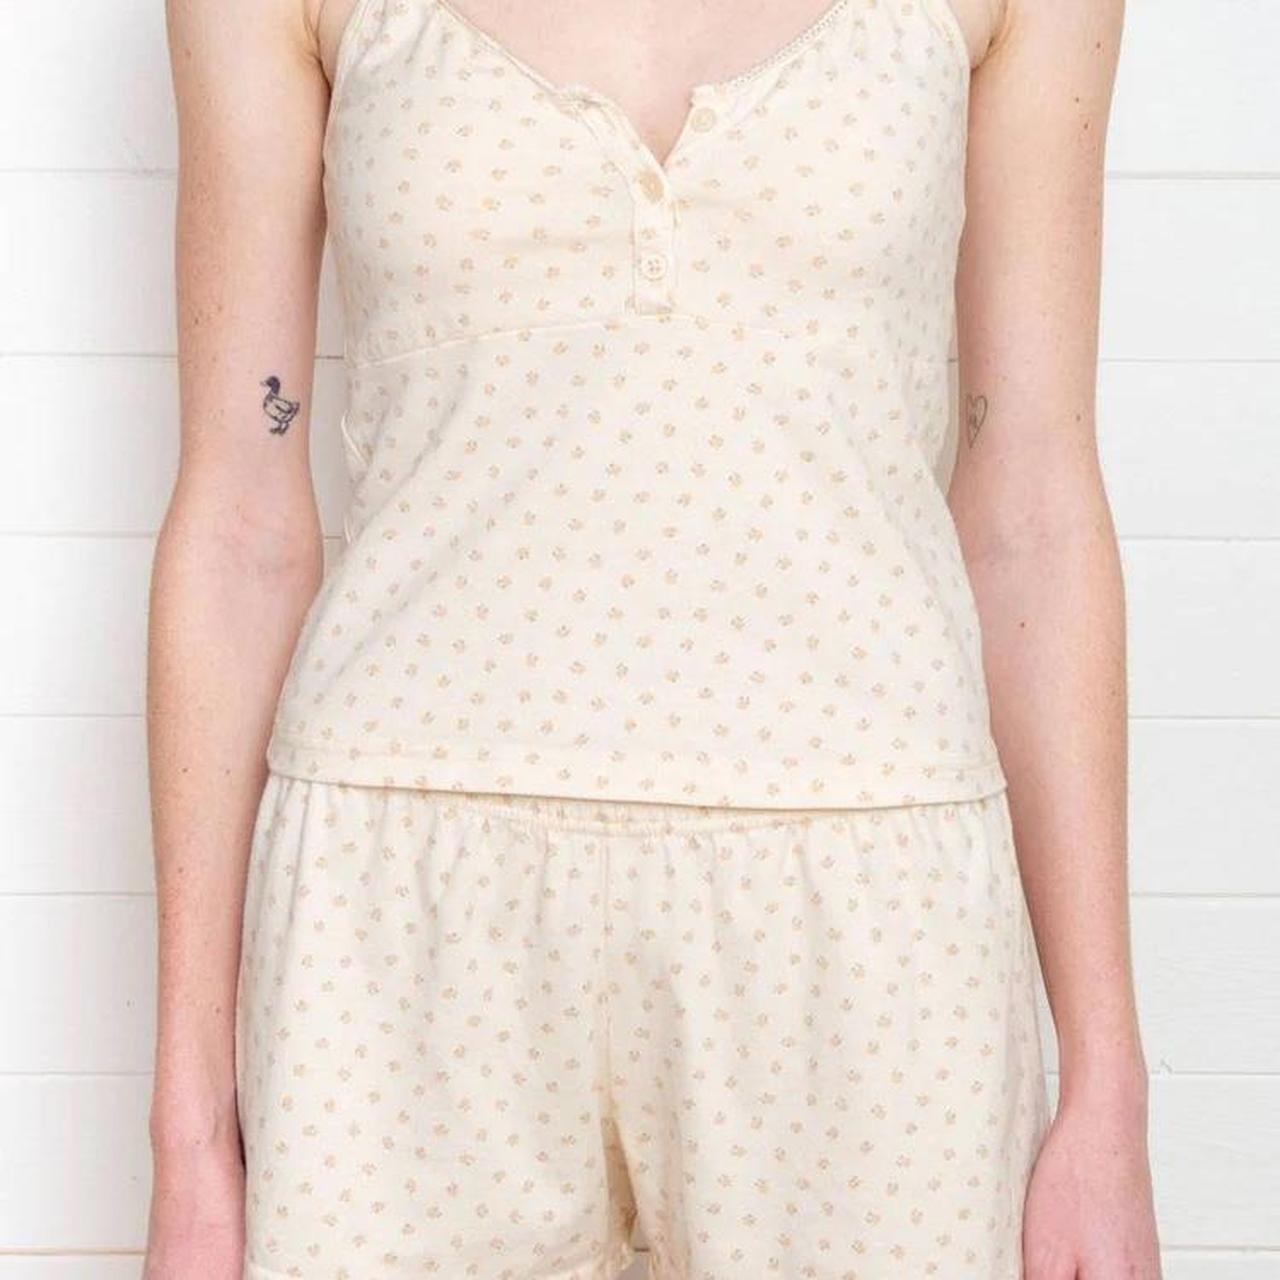 Brandy Melville floral tank Multi - $13 (40% Off Retail) - From janie